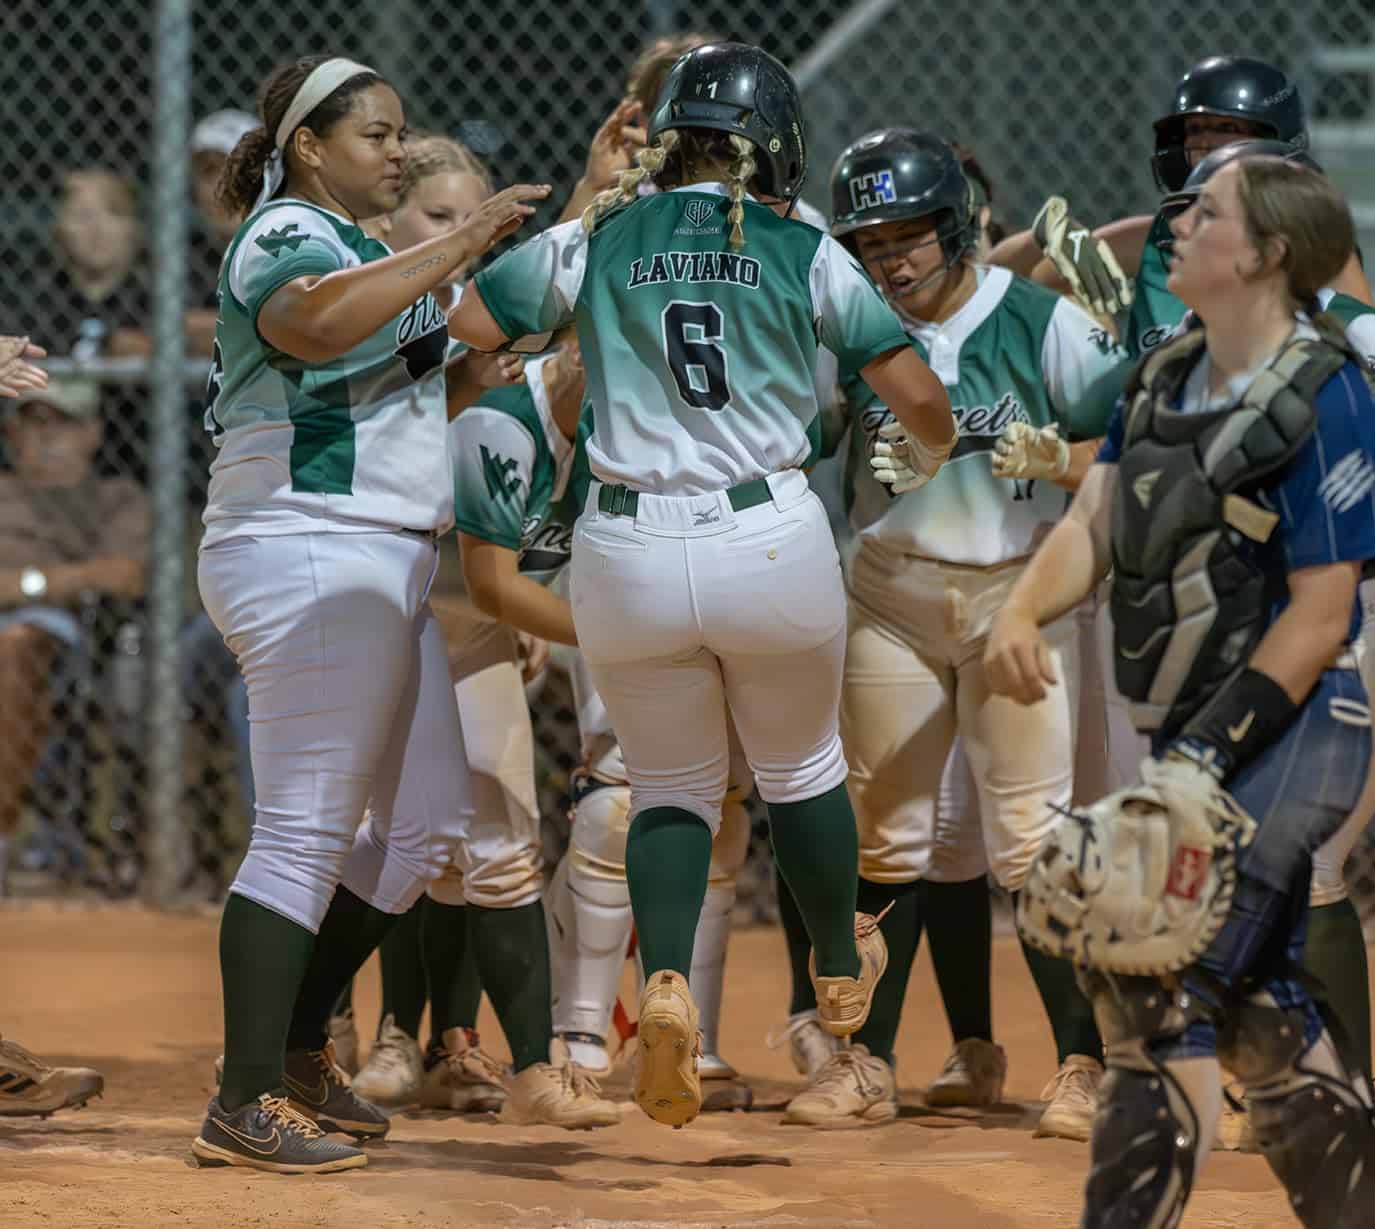 Weeki Wachee High Captain, 6, Taylor Laviano jumps onto home plate before being met by her teammates after her third home run, which proved to be the winning run against visiting Central High in the 4A District 5 playoff game . Photo by [Joseph Dicristofalo]